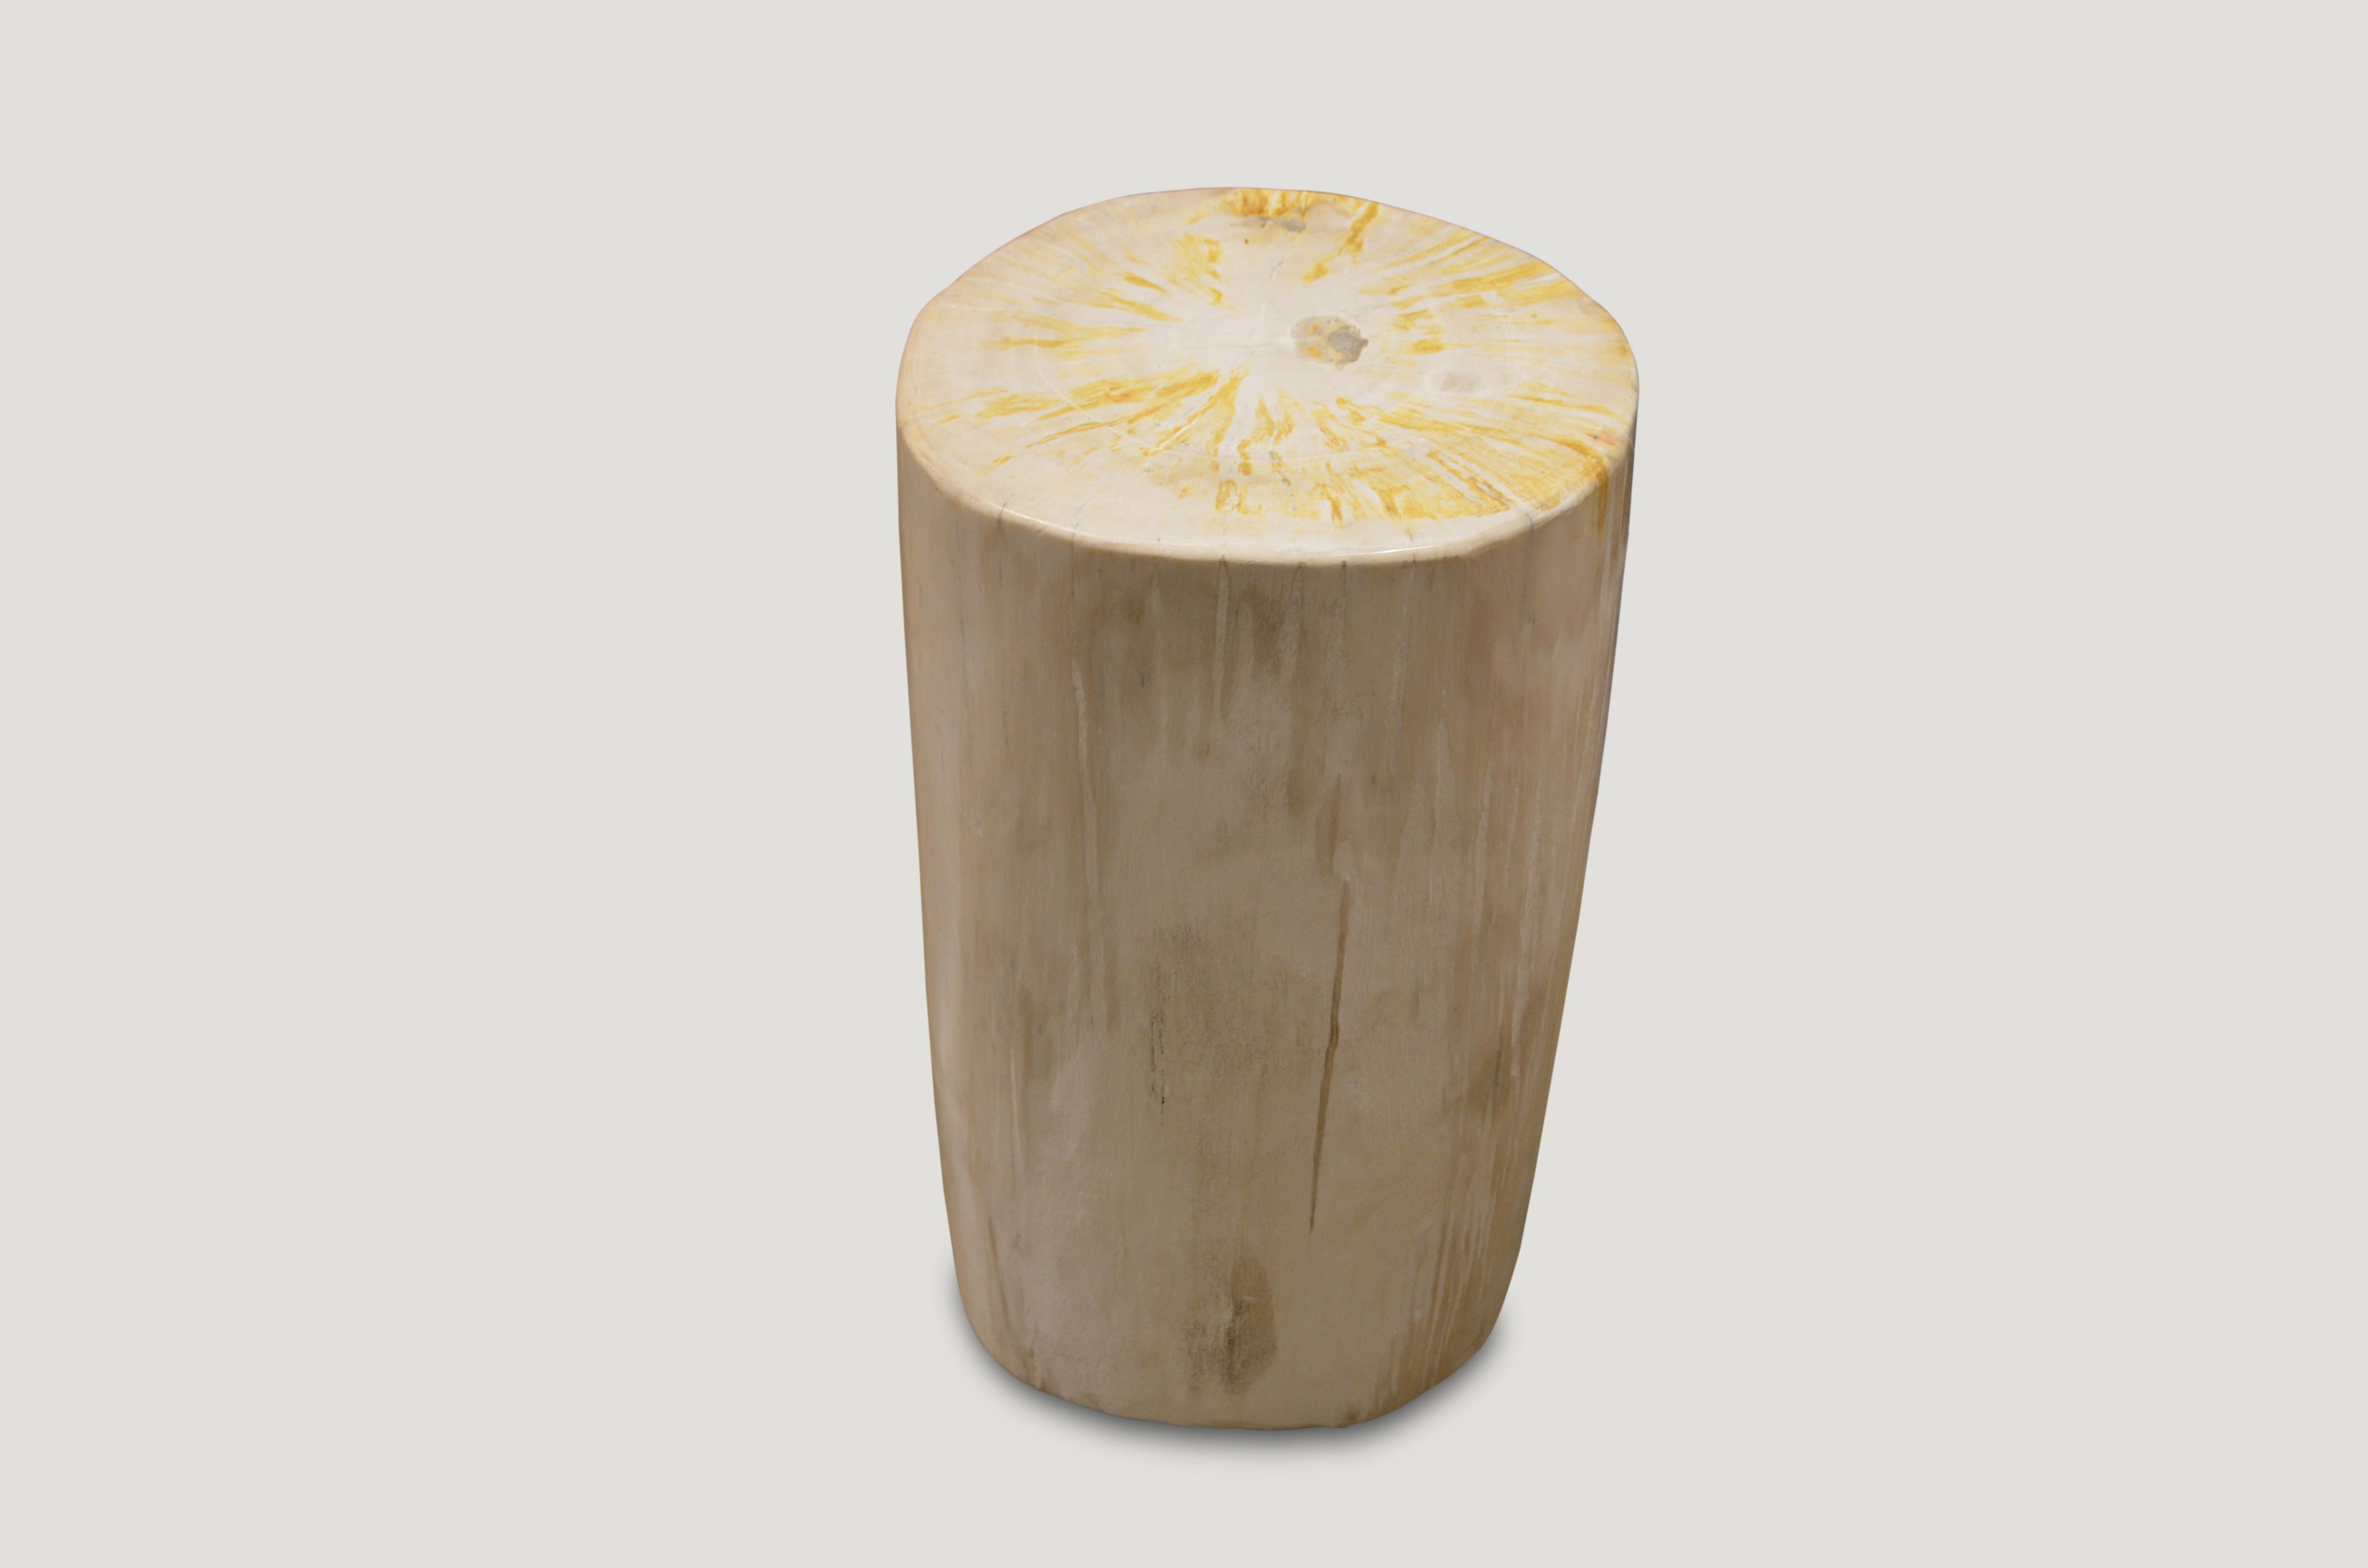 Soft creamy tones on this super smooth petrified wood side table or stool.

We source the highest quality petrified wood available. Each piece is hand-selected and highly polished with minimal cracks. Petrified wood is extremely versatile – even